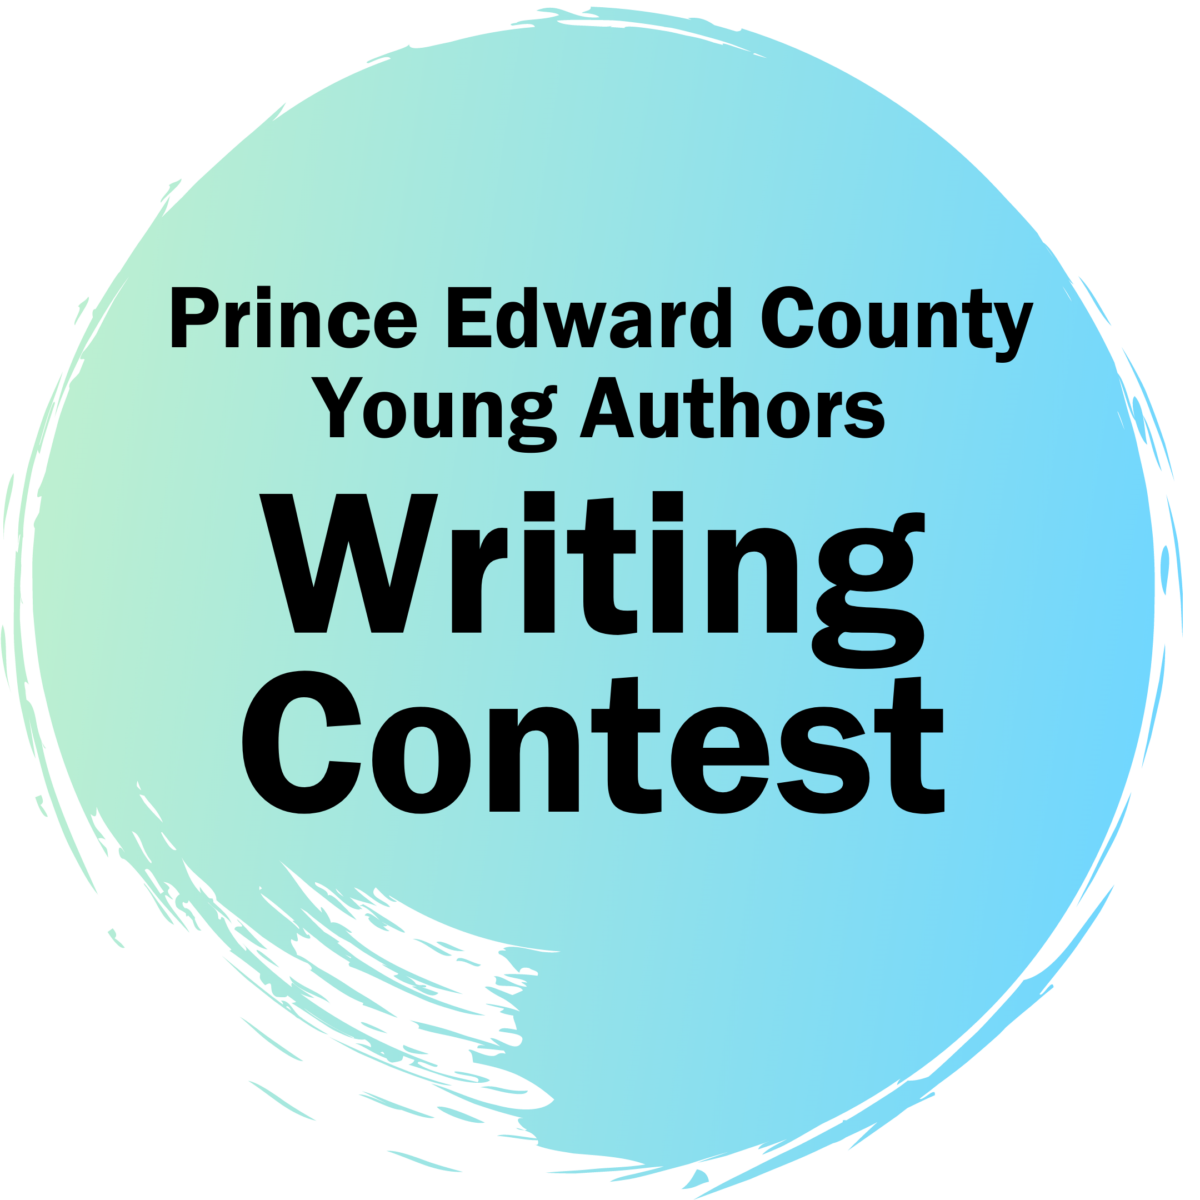 Prince Edward County Young Authors Writing Contest